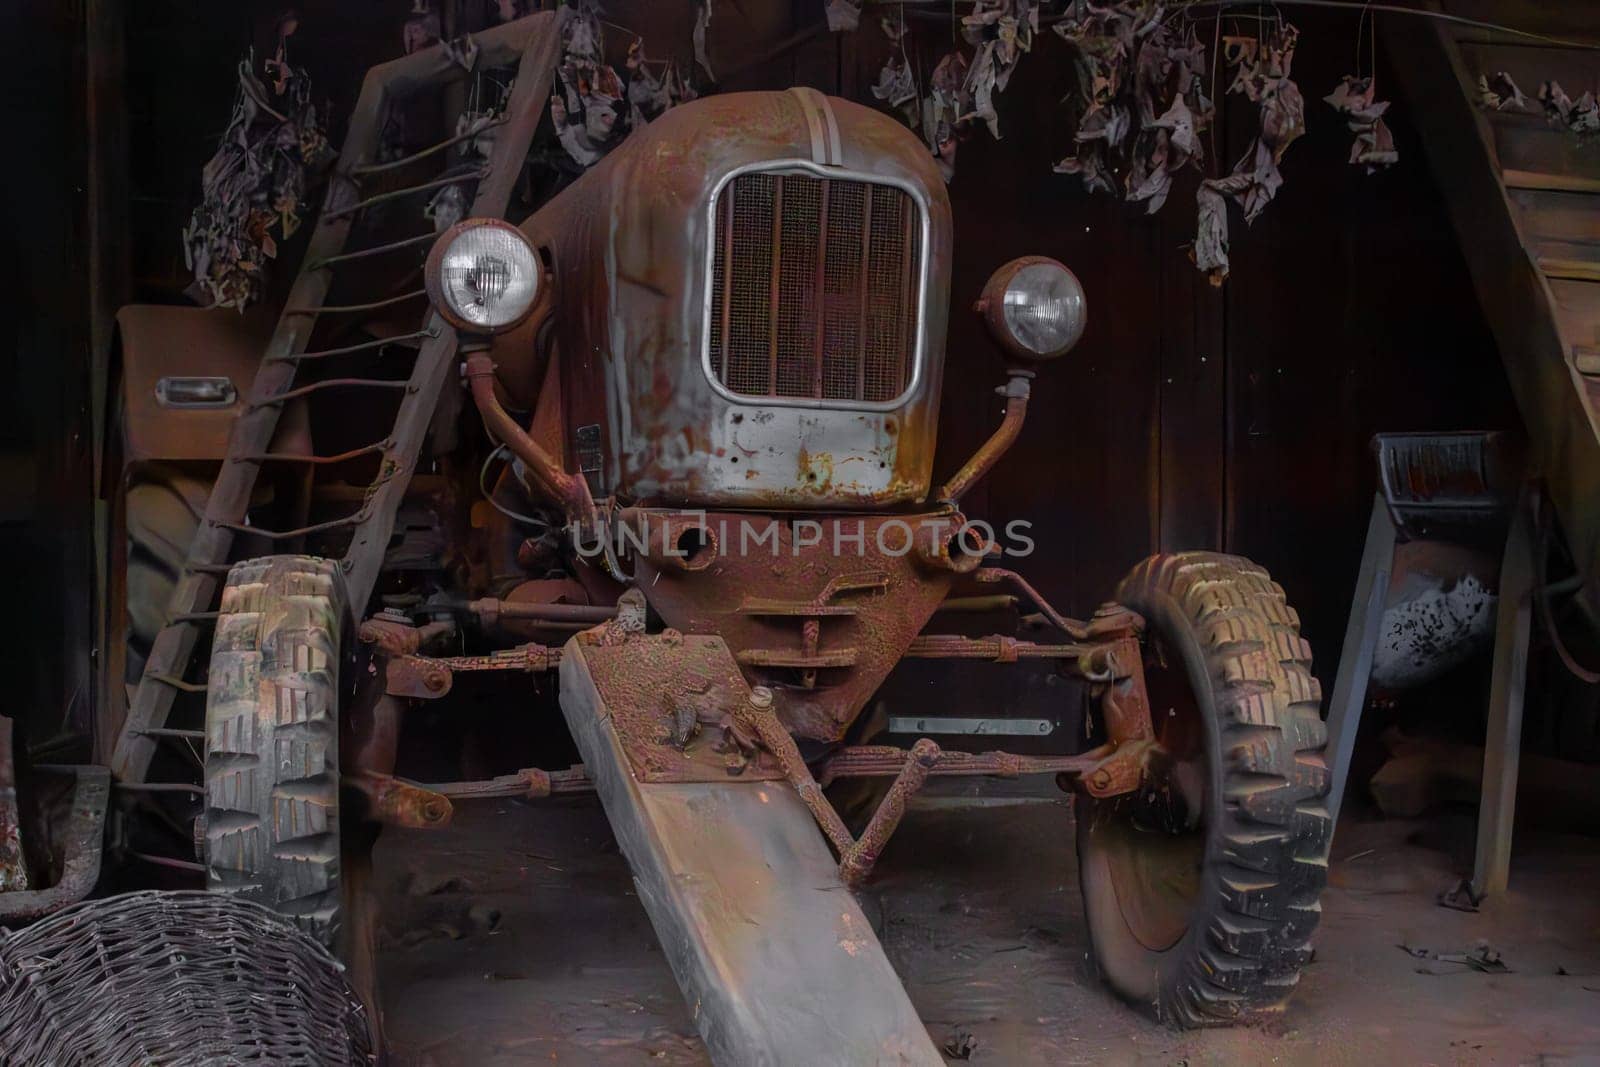 Old Barn with vintage tractor. High quality photo